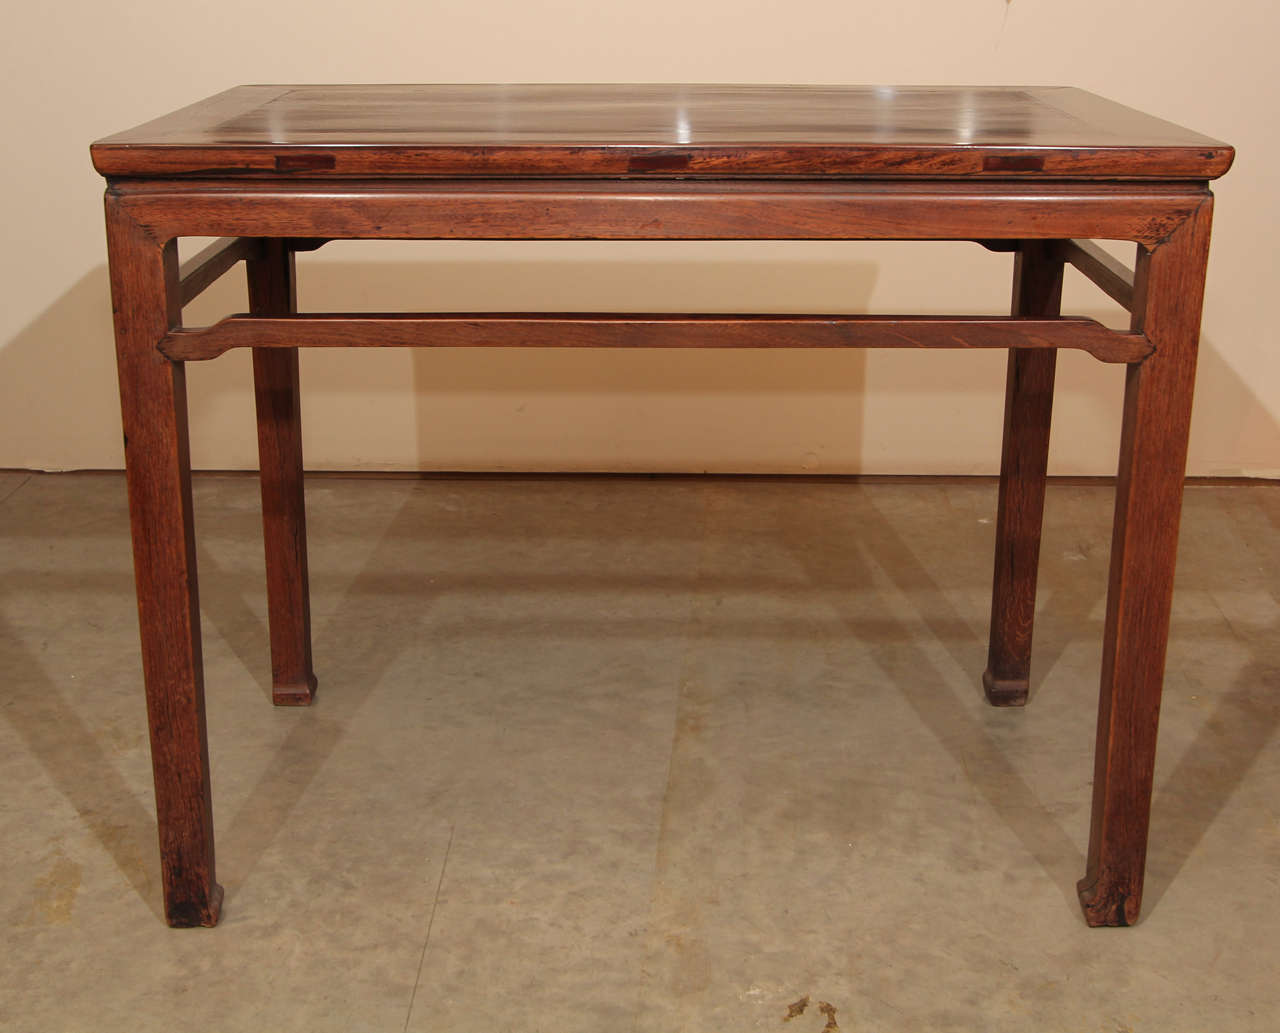 A 19th century Ching dynasty Chinese painting table in the Ming style with blackwood on a Chinese elm base.